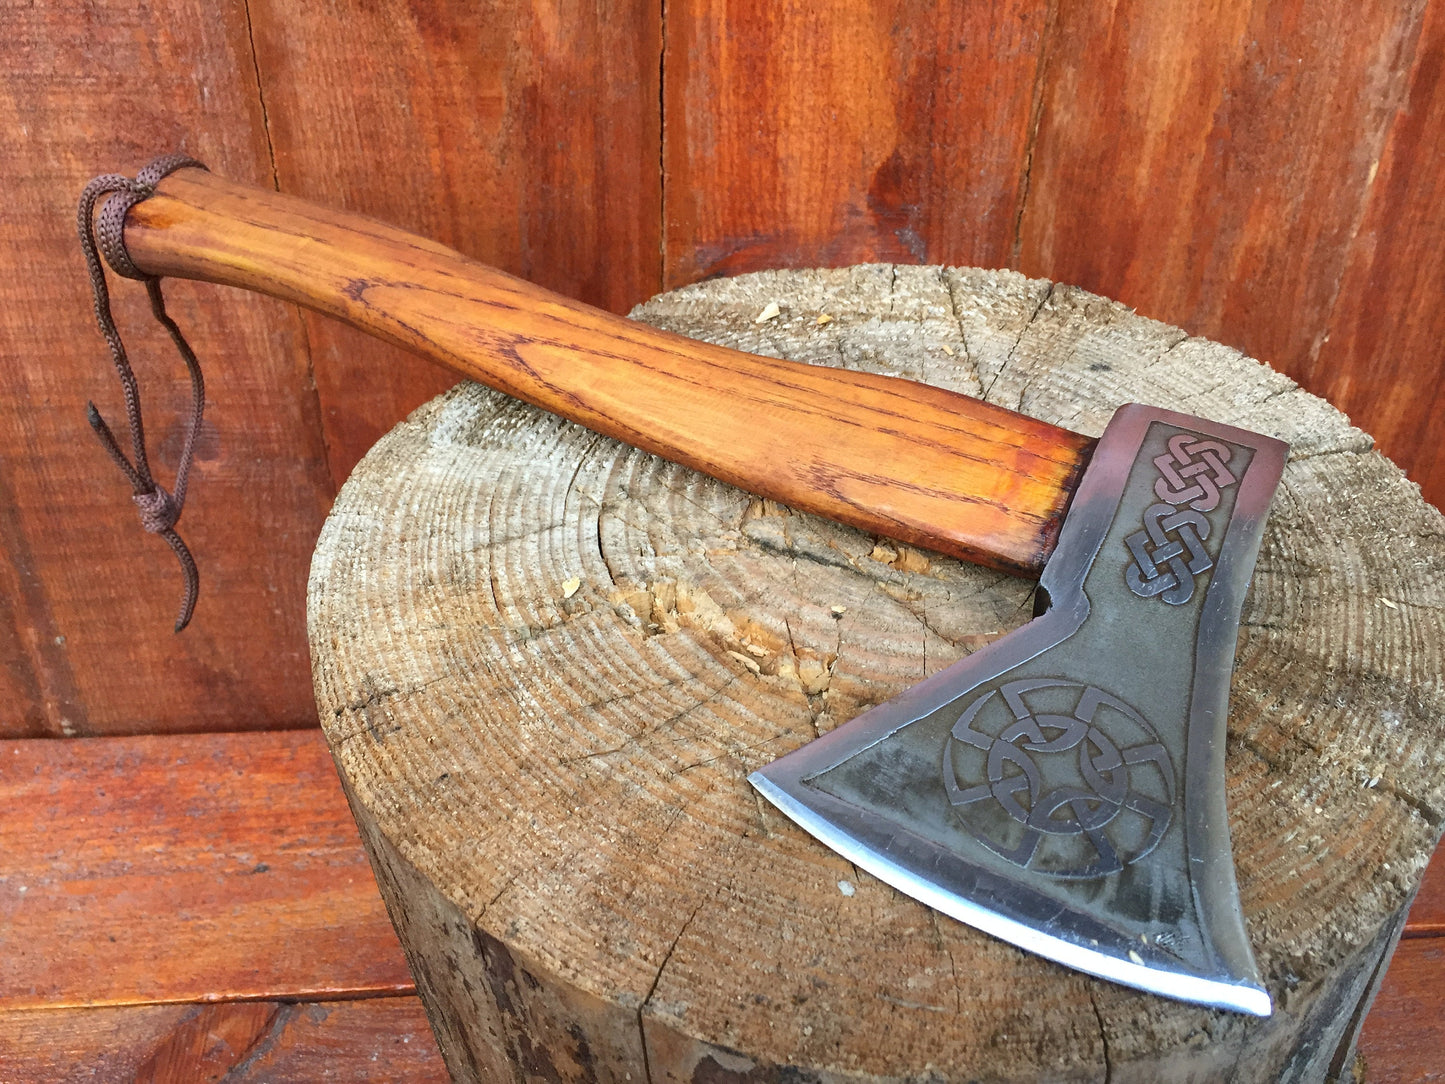 Mens gifts, viking axe, leviathan axe, tomahawk, handyman tool, axe, steel decor, steel gifts for men - 11th anniversary, iron gifts, steel